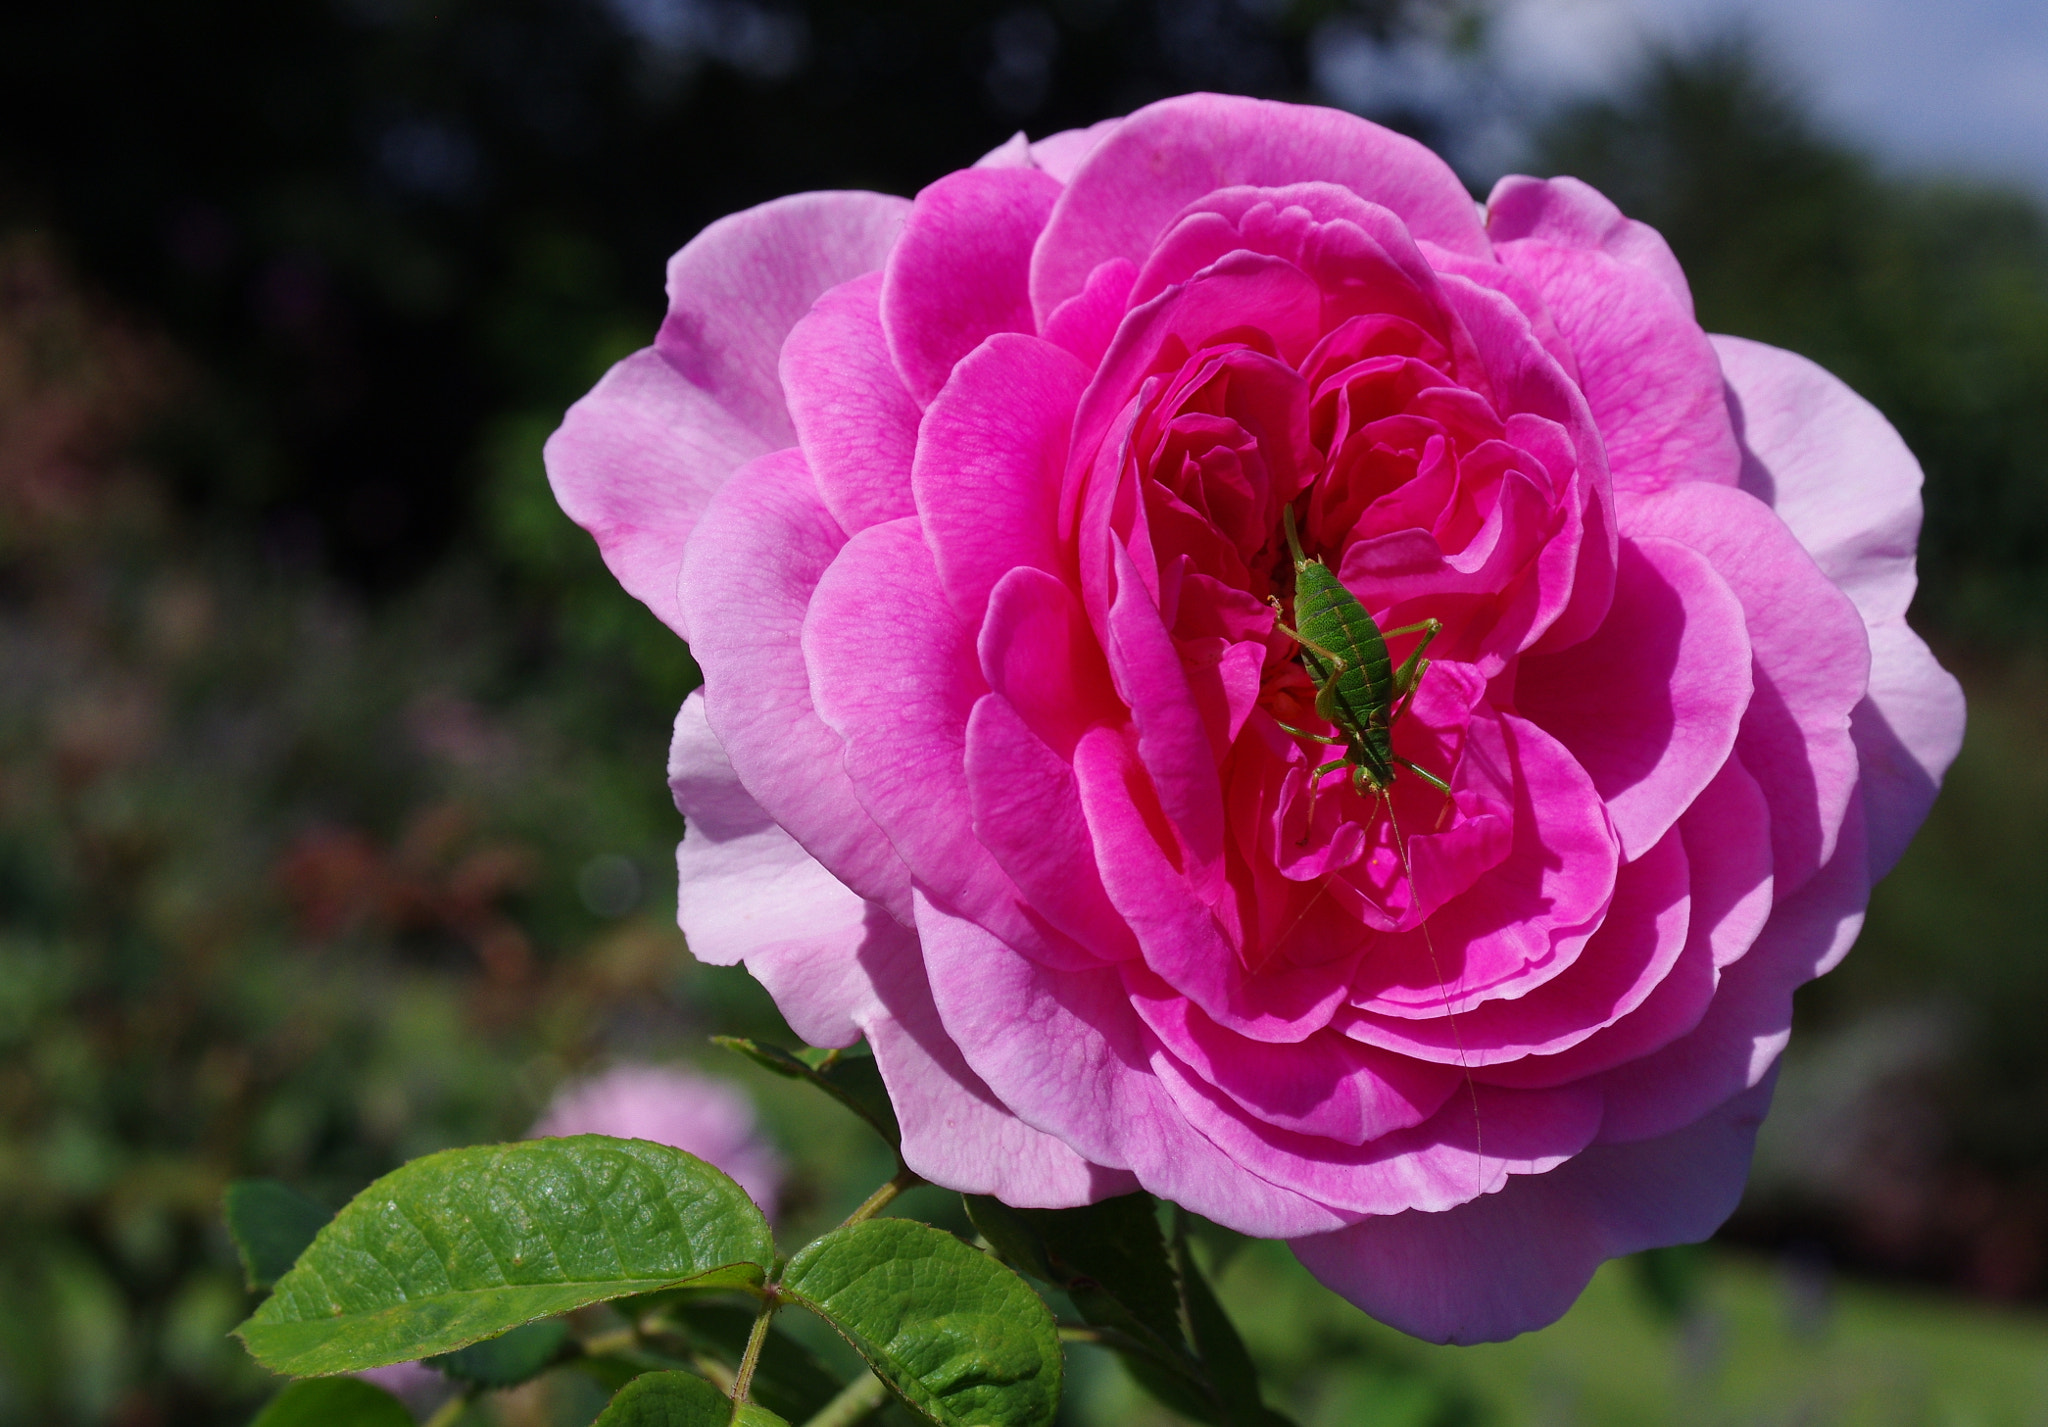 Pentax K-5 sample photo. Such an attractive rose photography